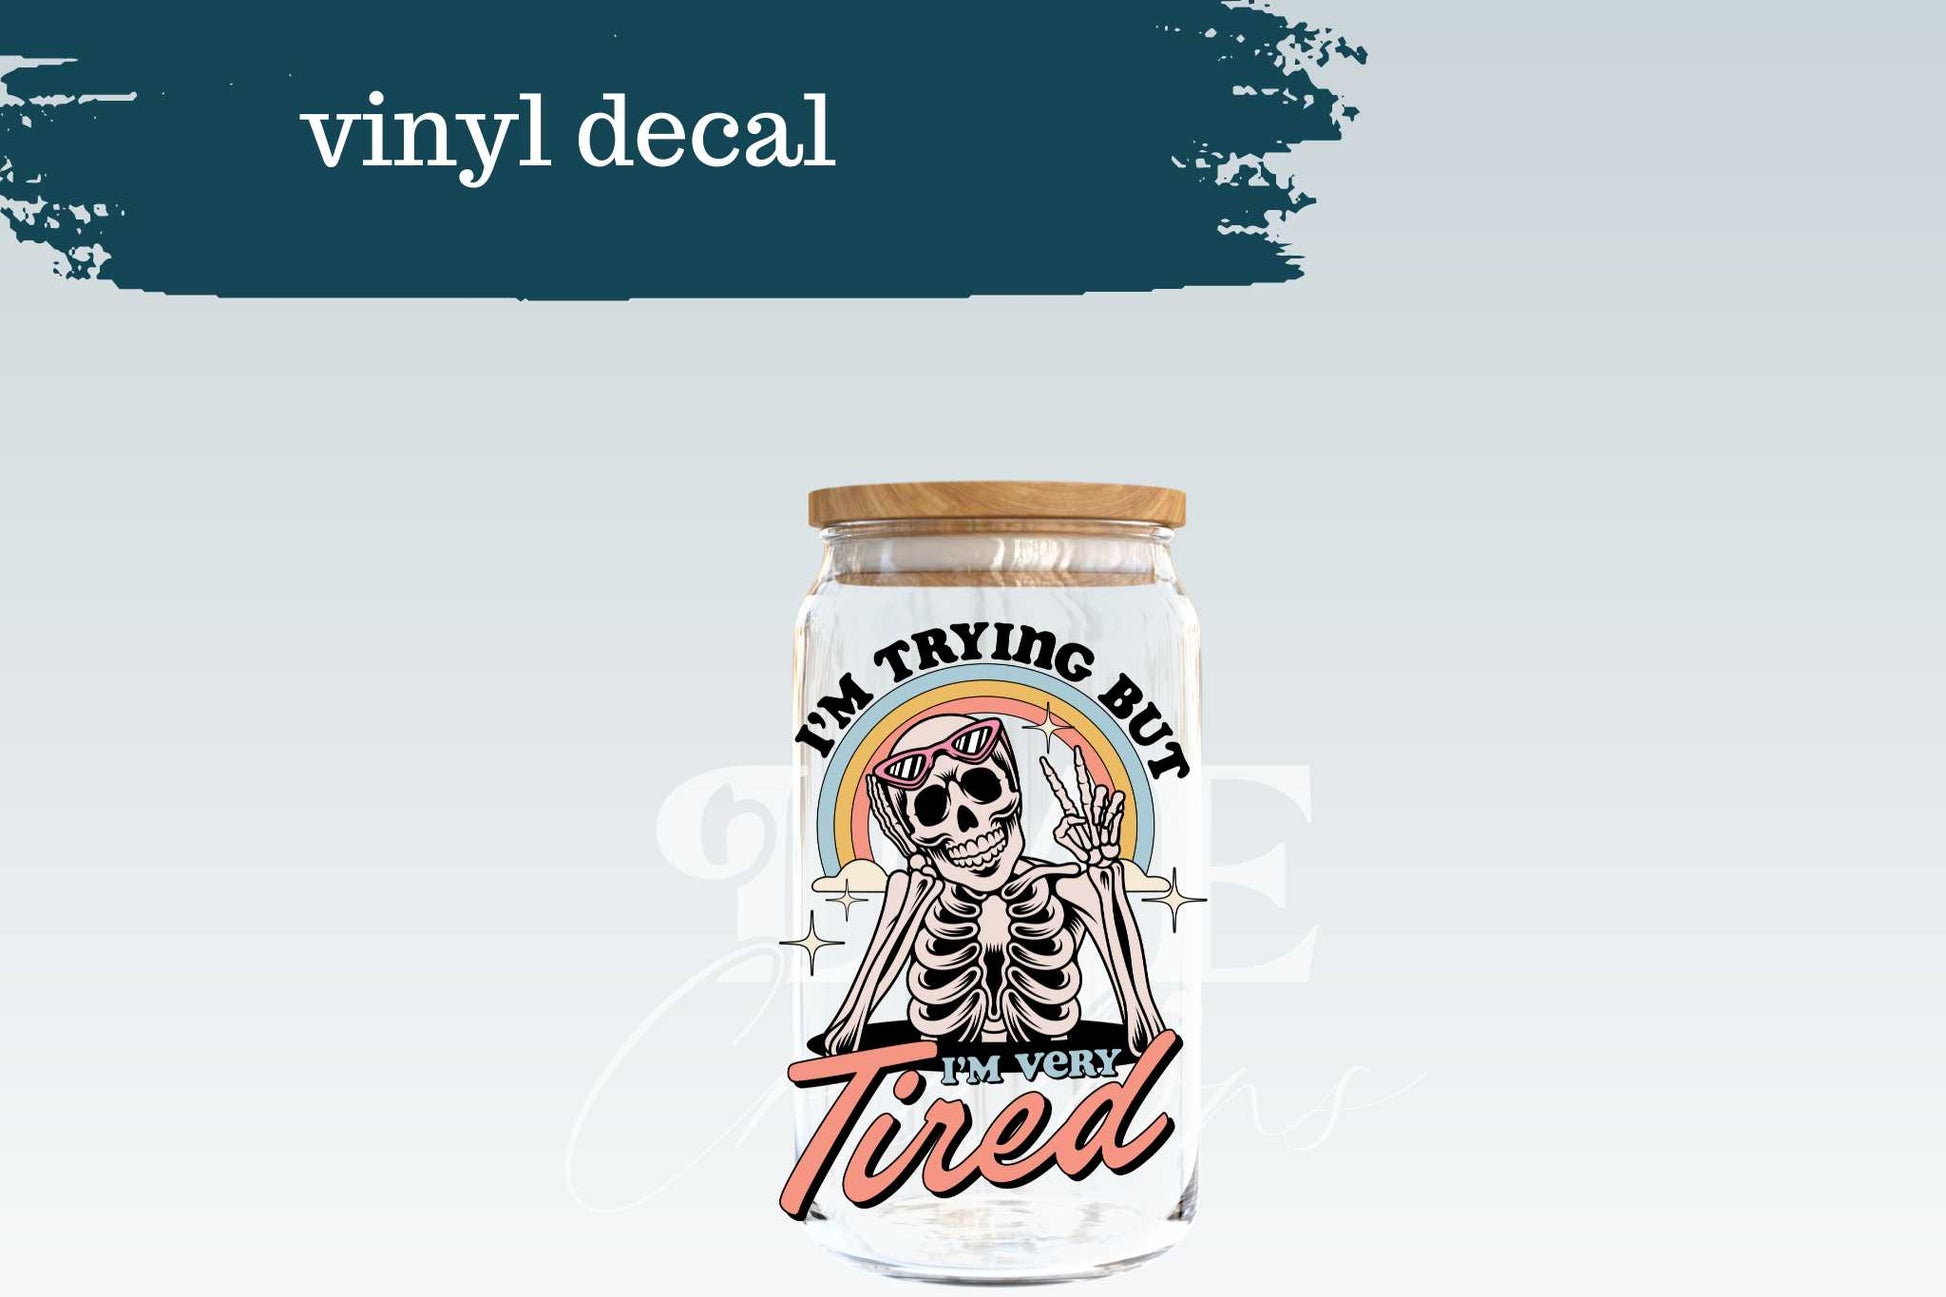 I'm Trying but Tired | Vinyl Decal